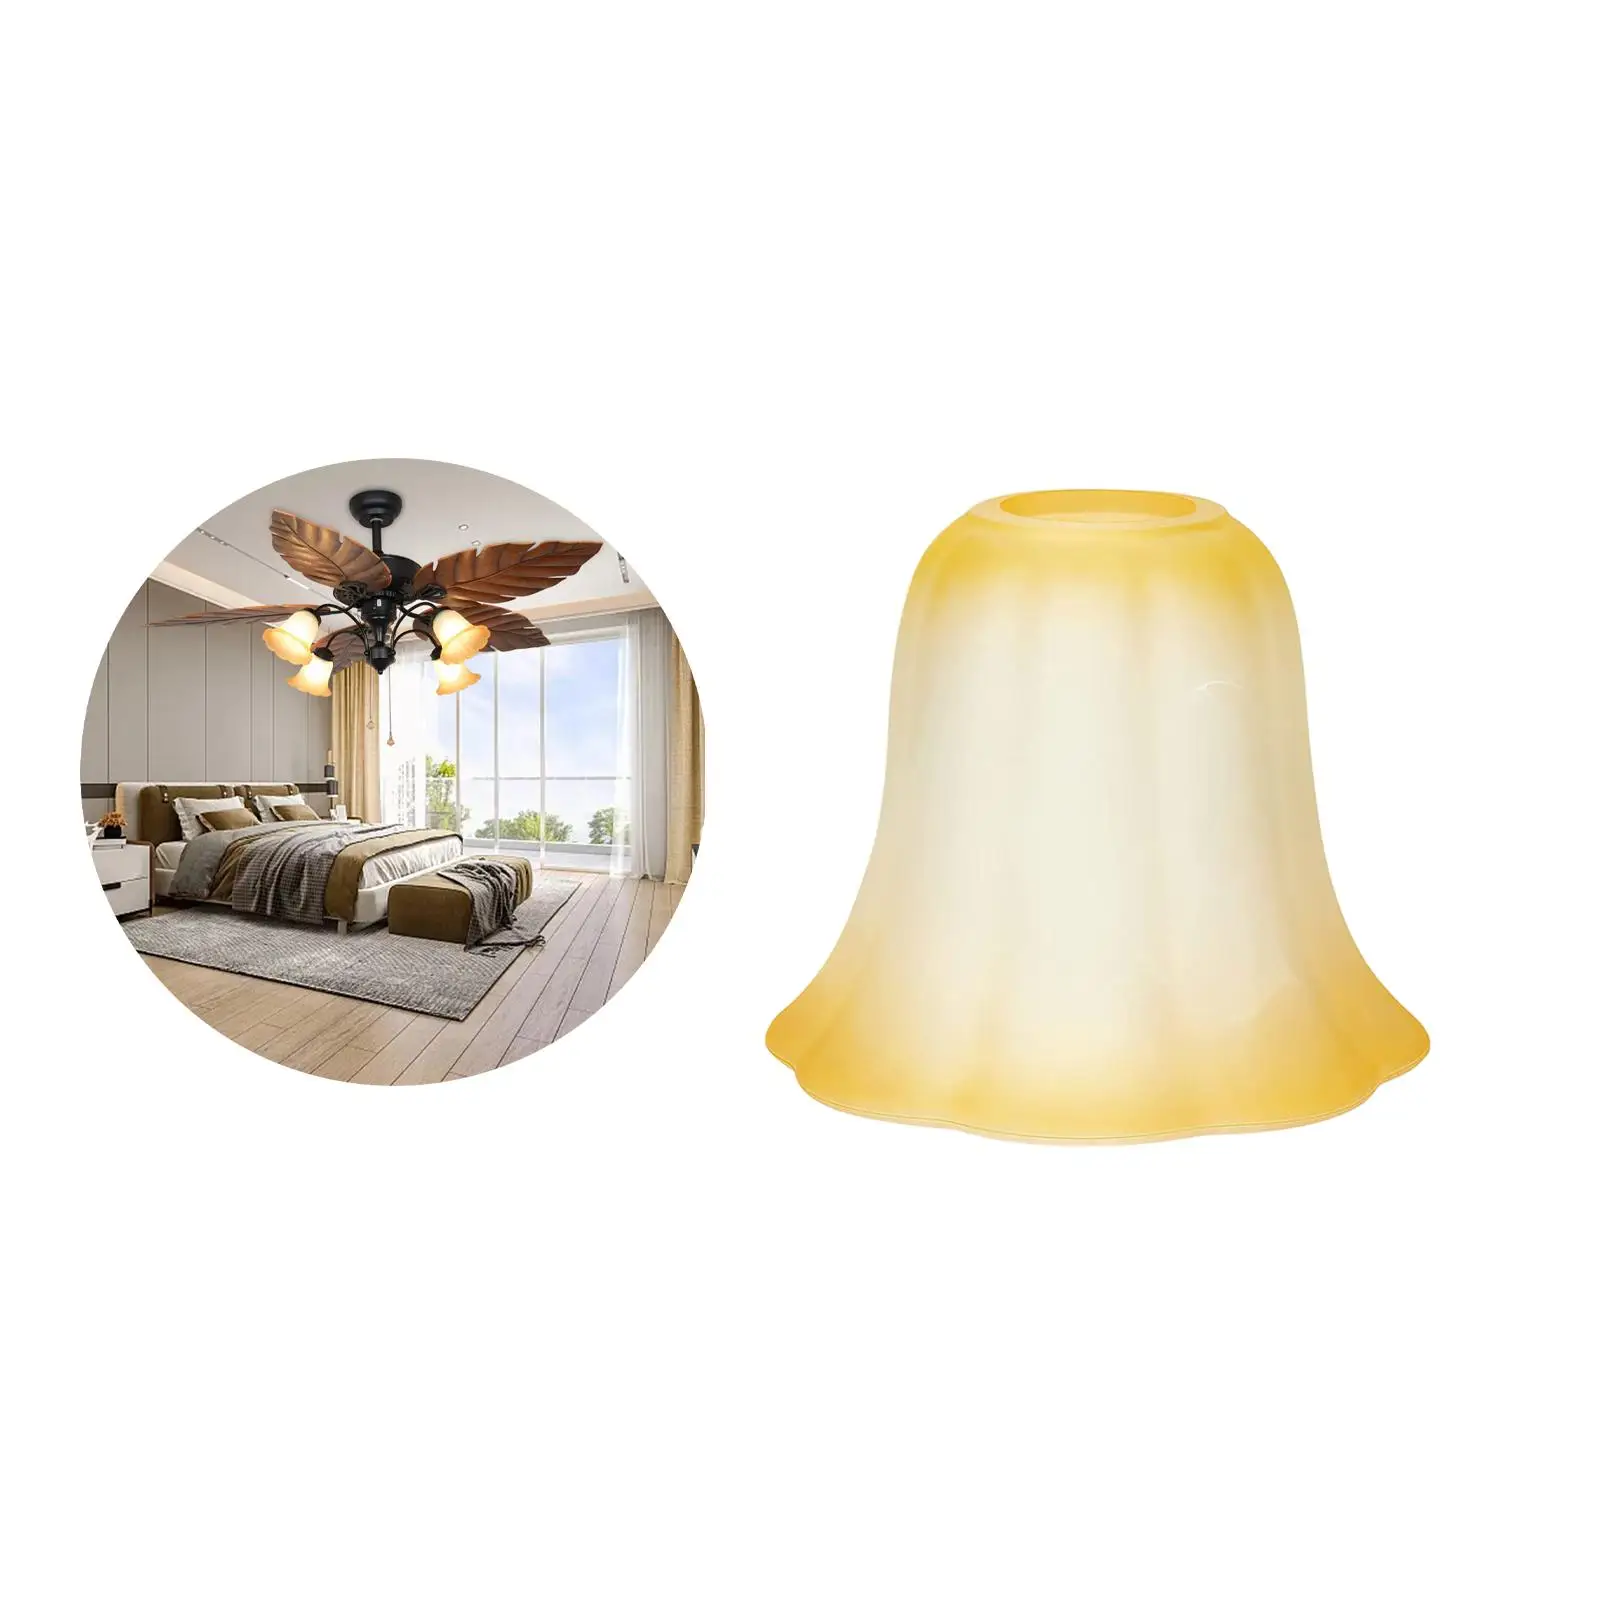 Modern Ceiling Light Fixture Cover Hanging Decorative Frost Glass Lamp Shade